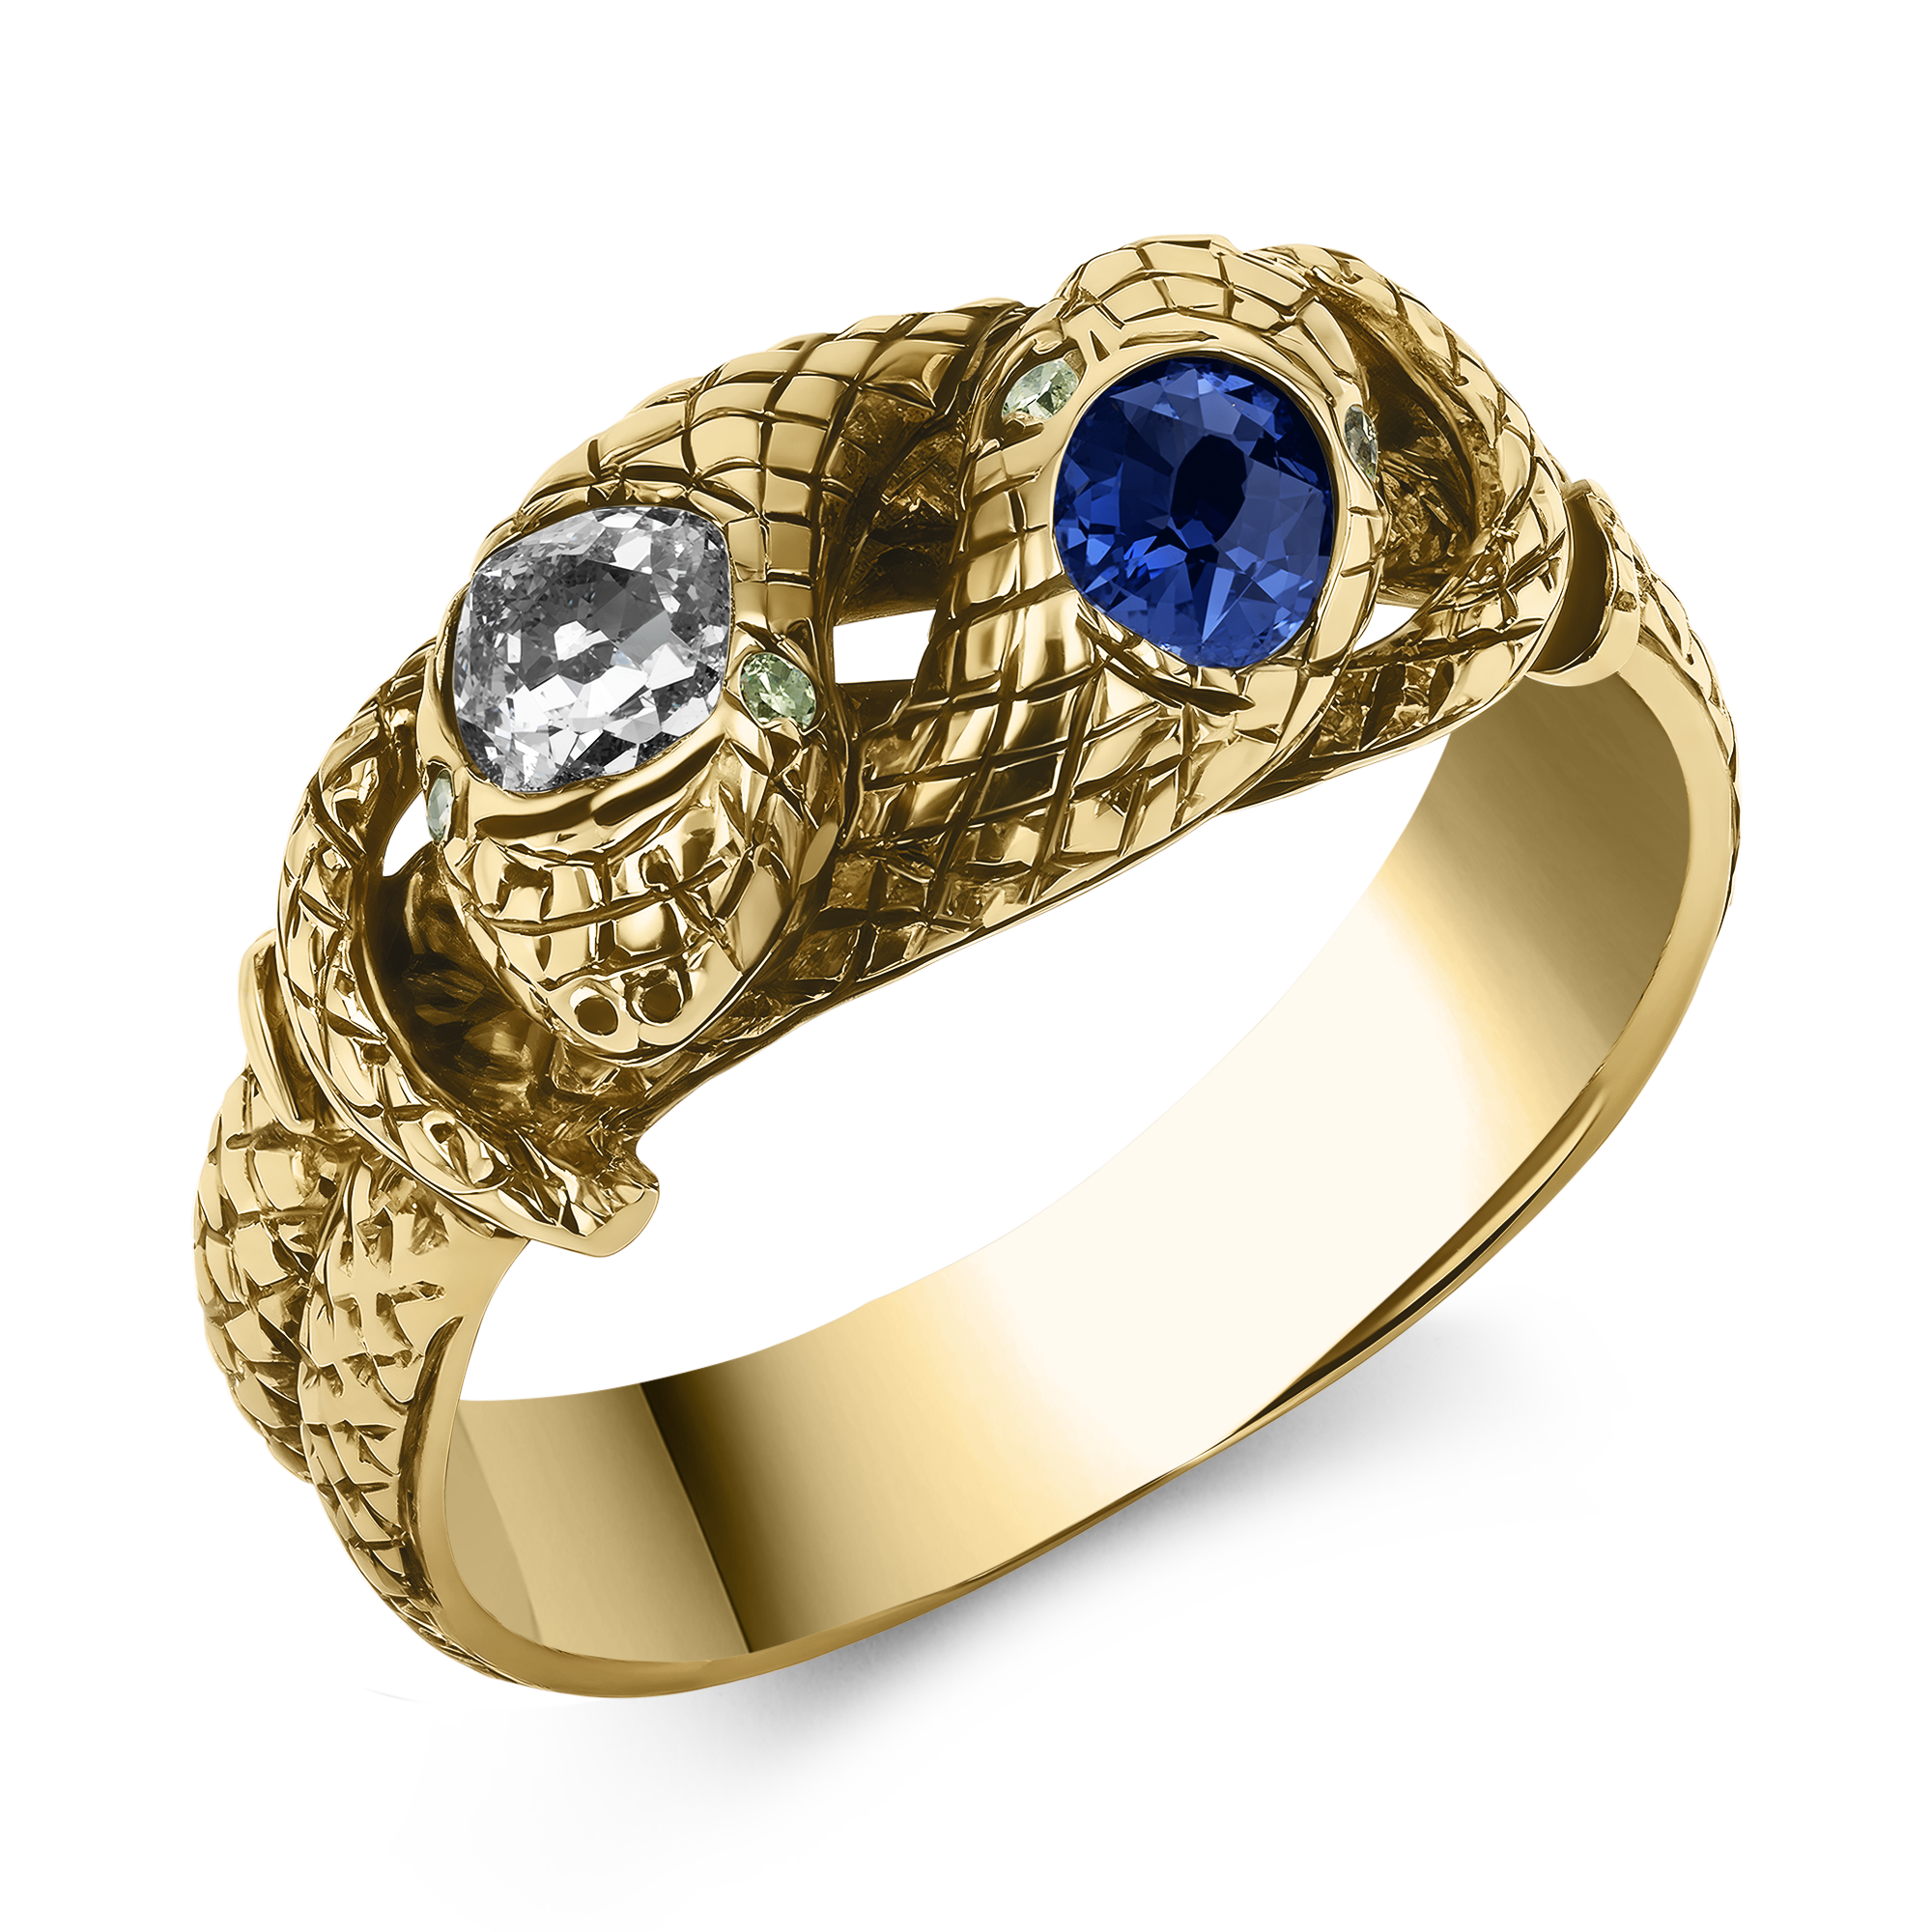 Belle Epoque Sapphire and Diamond Entwined Snake Ring Old Mine Cut, Rubover Set_1